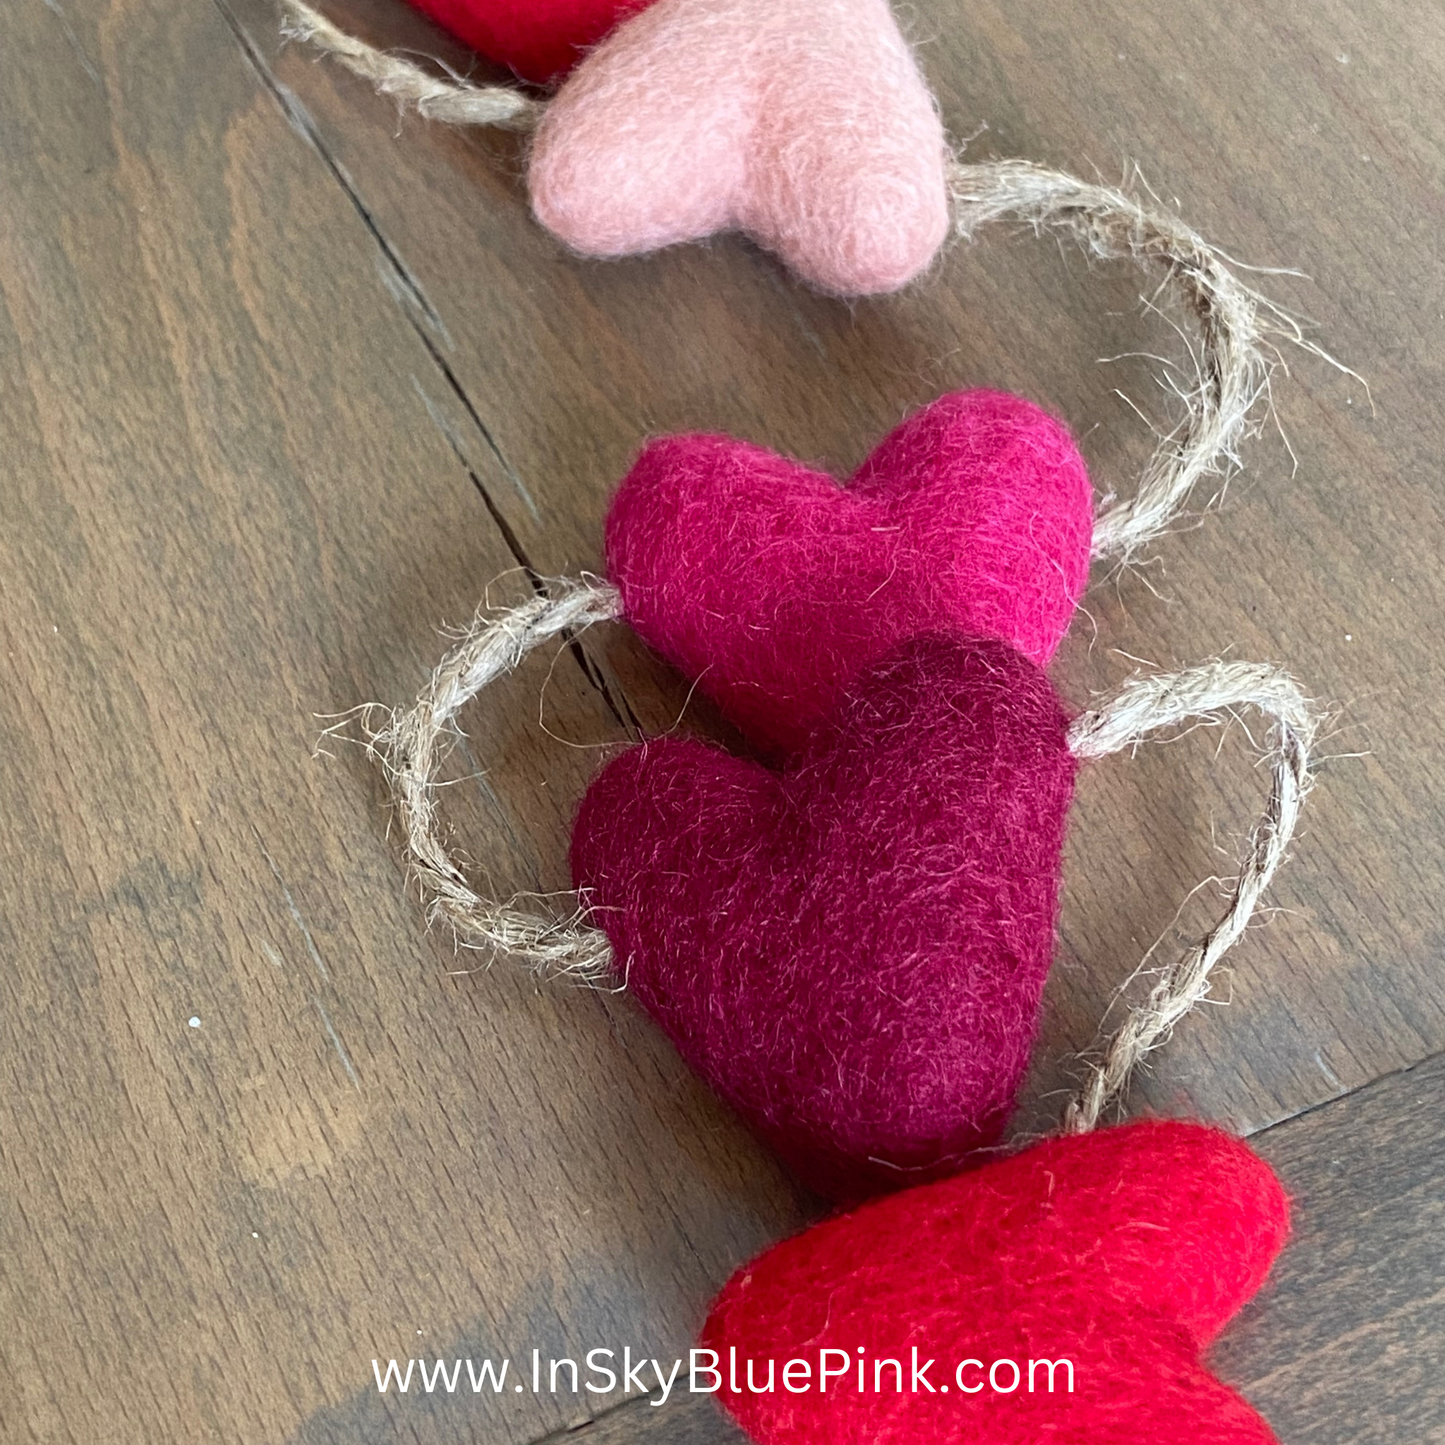 Shades of Pink Felted Wool Hearts Garland-4-foot Valentine Day Decor